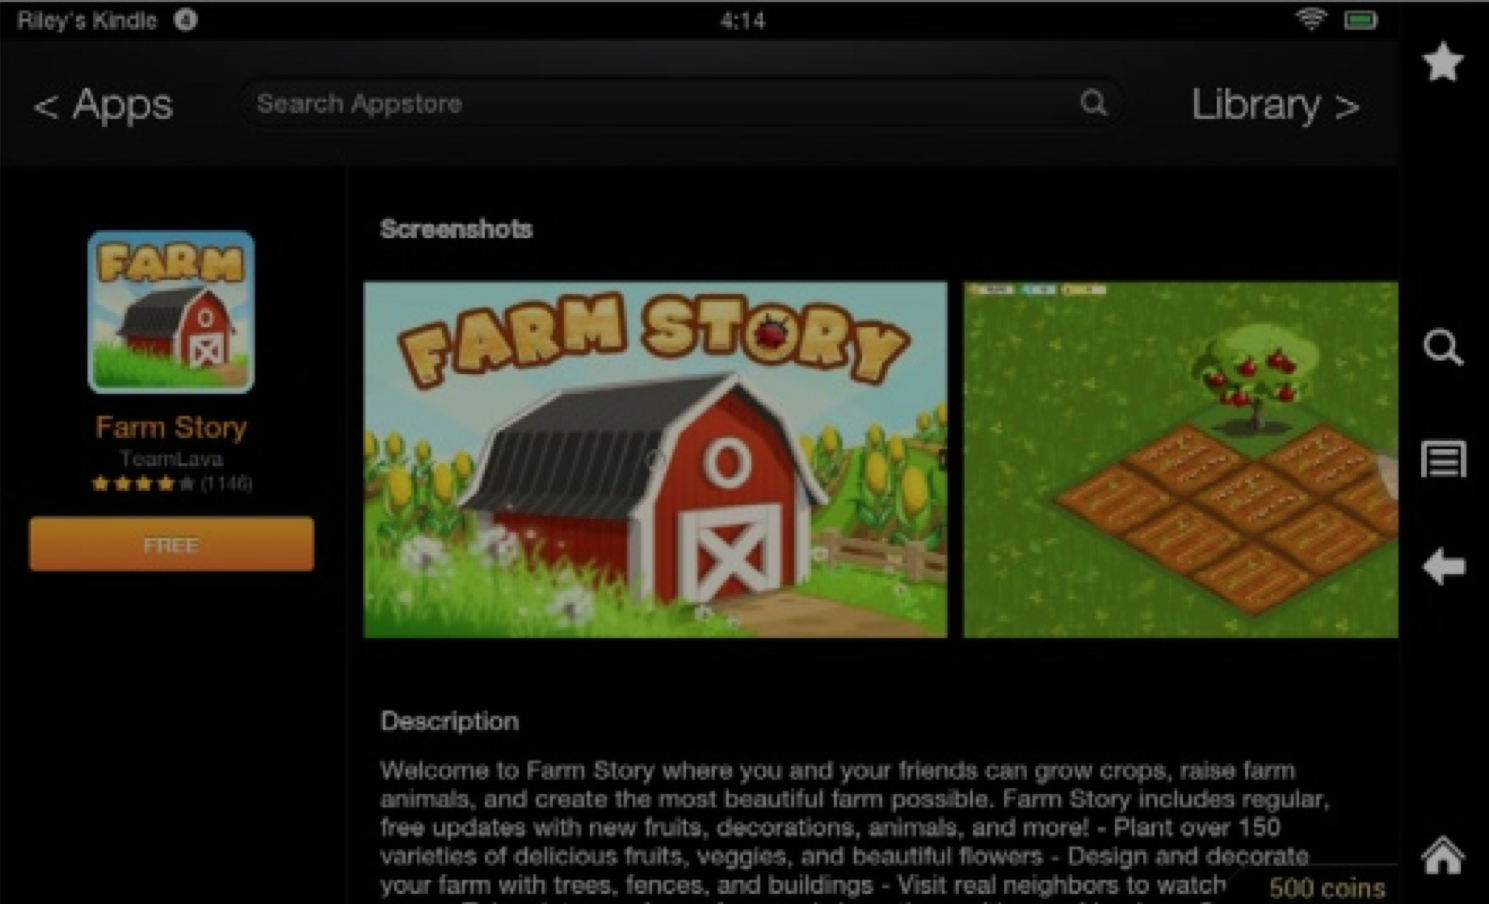 Amazon Found Liable For Unfairly Billing Parents For Kids’ In-App Purchases